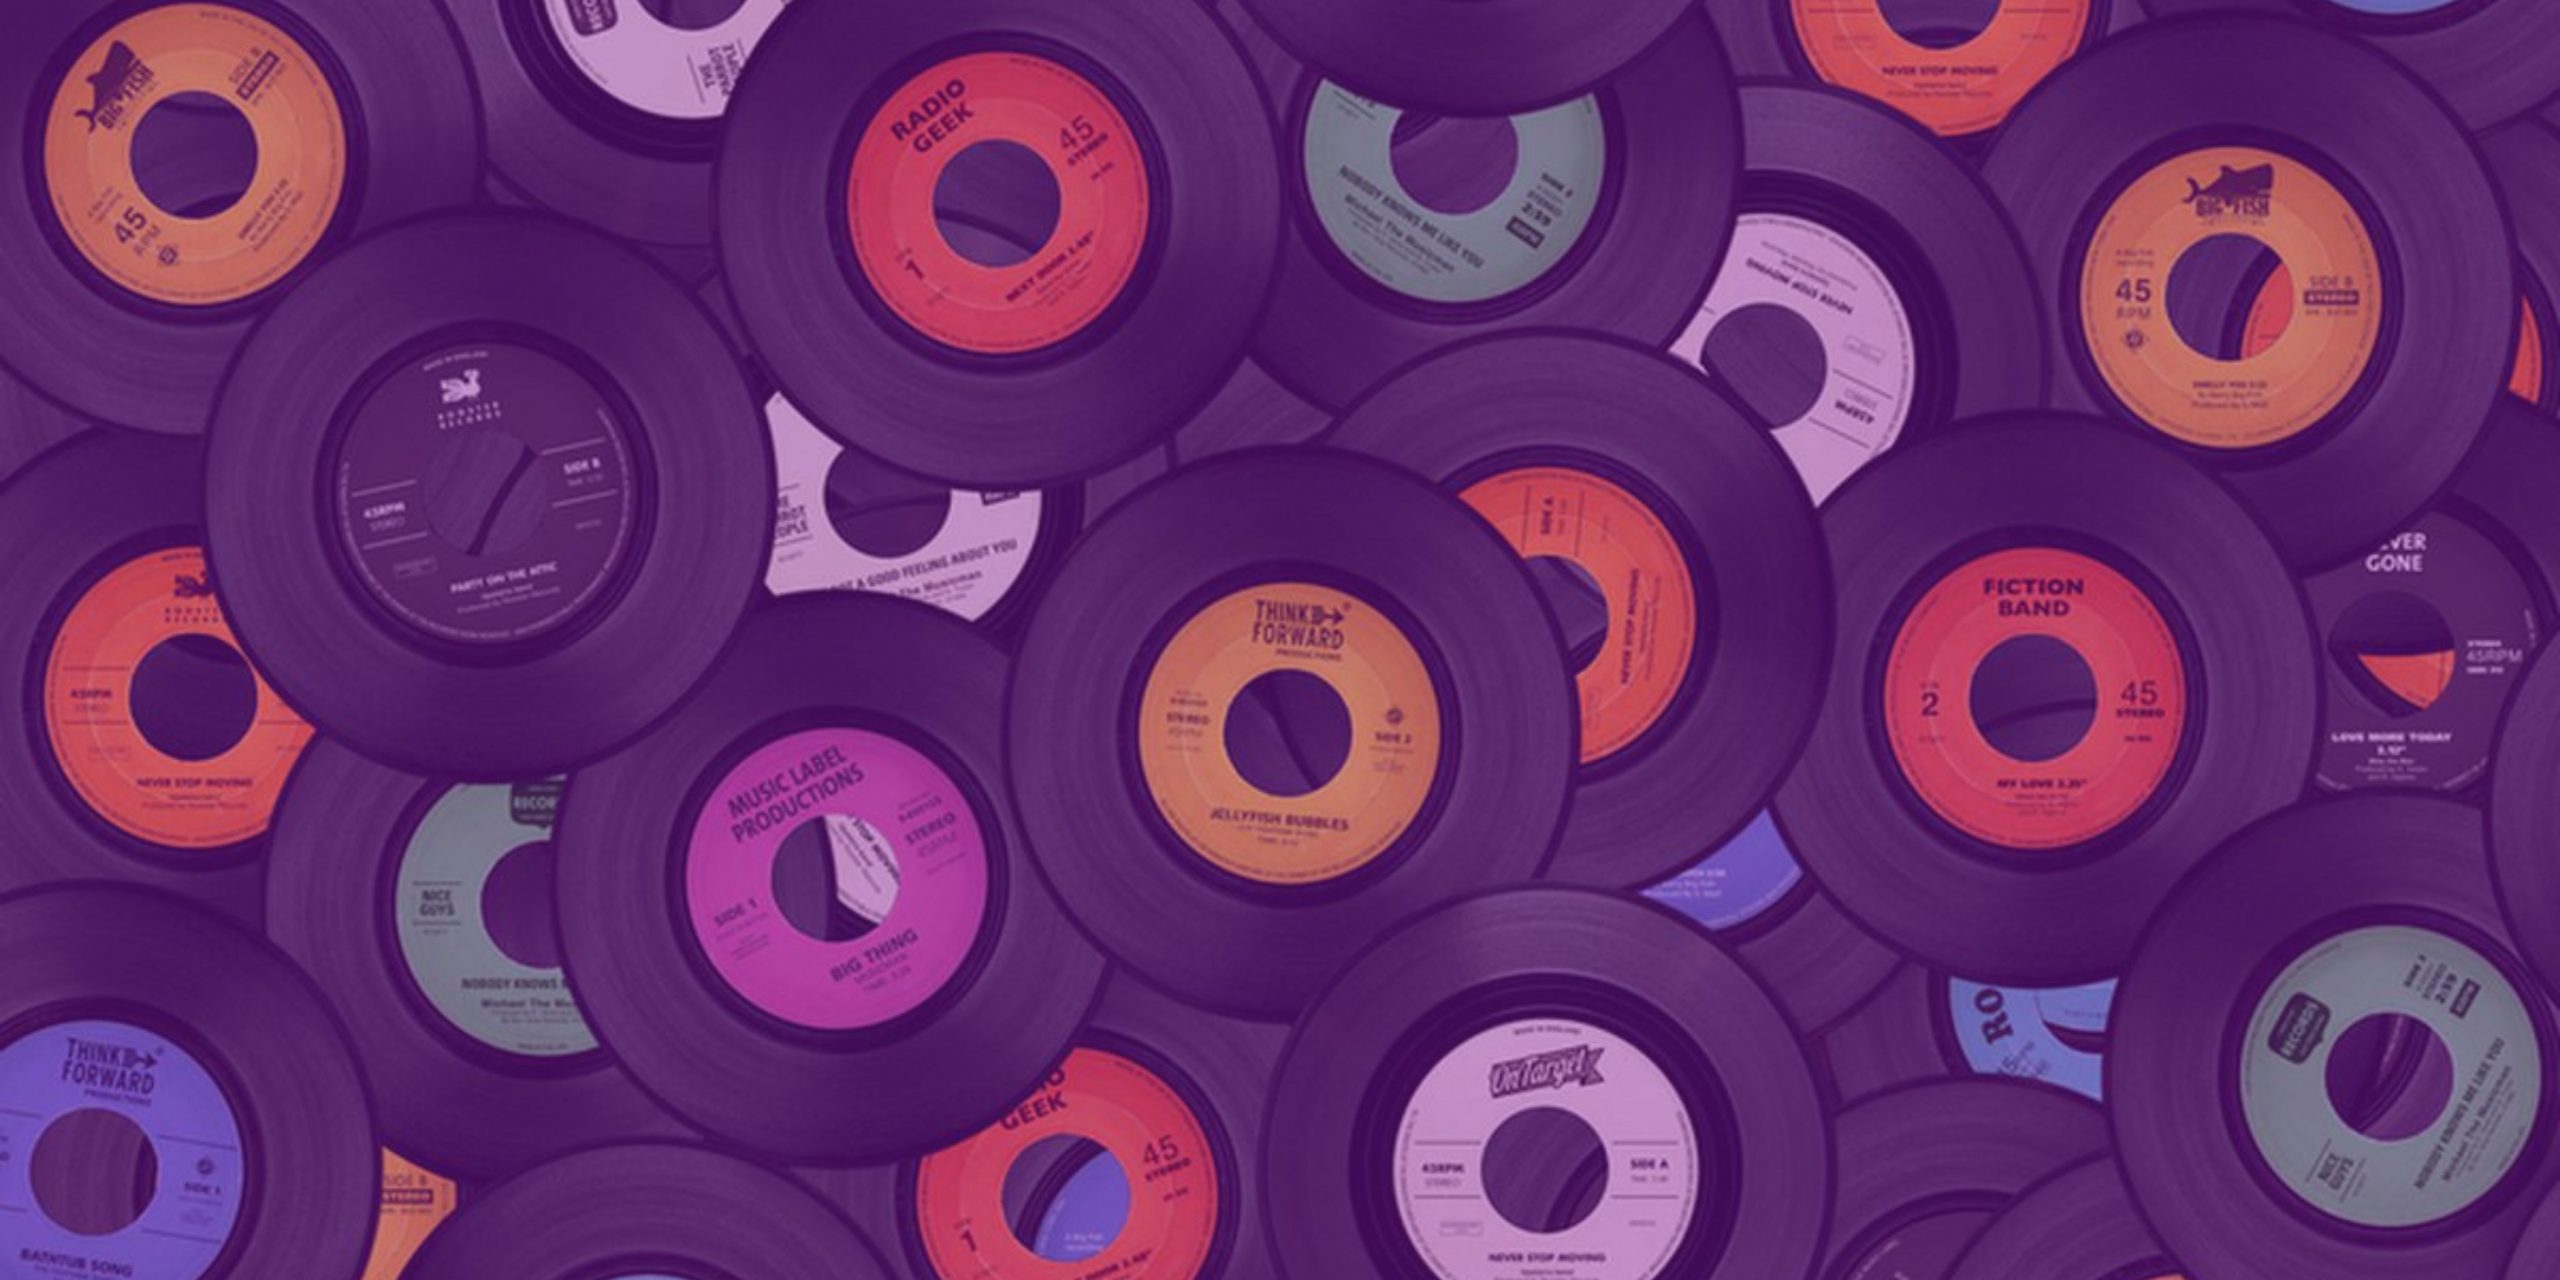 State of the Industry: Major Label vs. Non-Major Label Regional Performance  - Hypebot